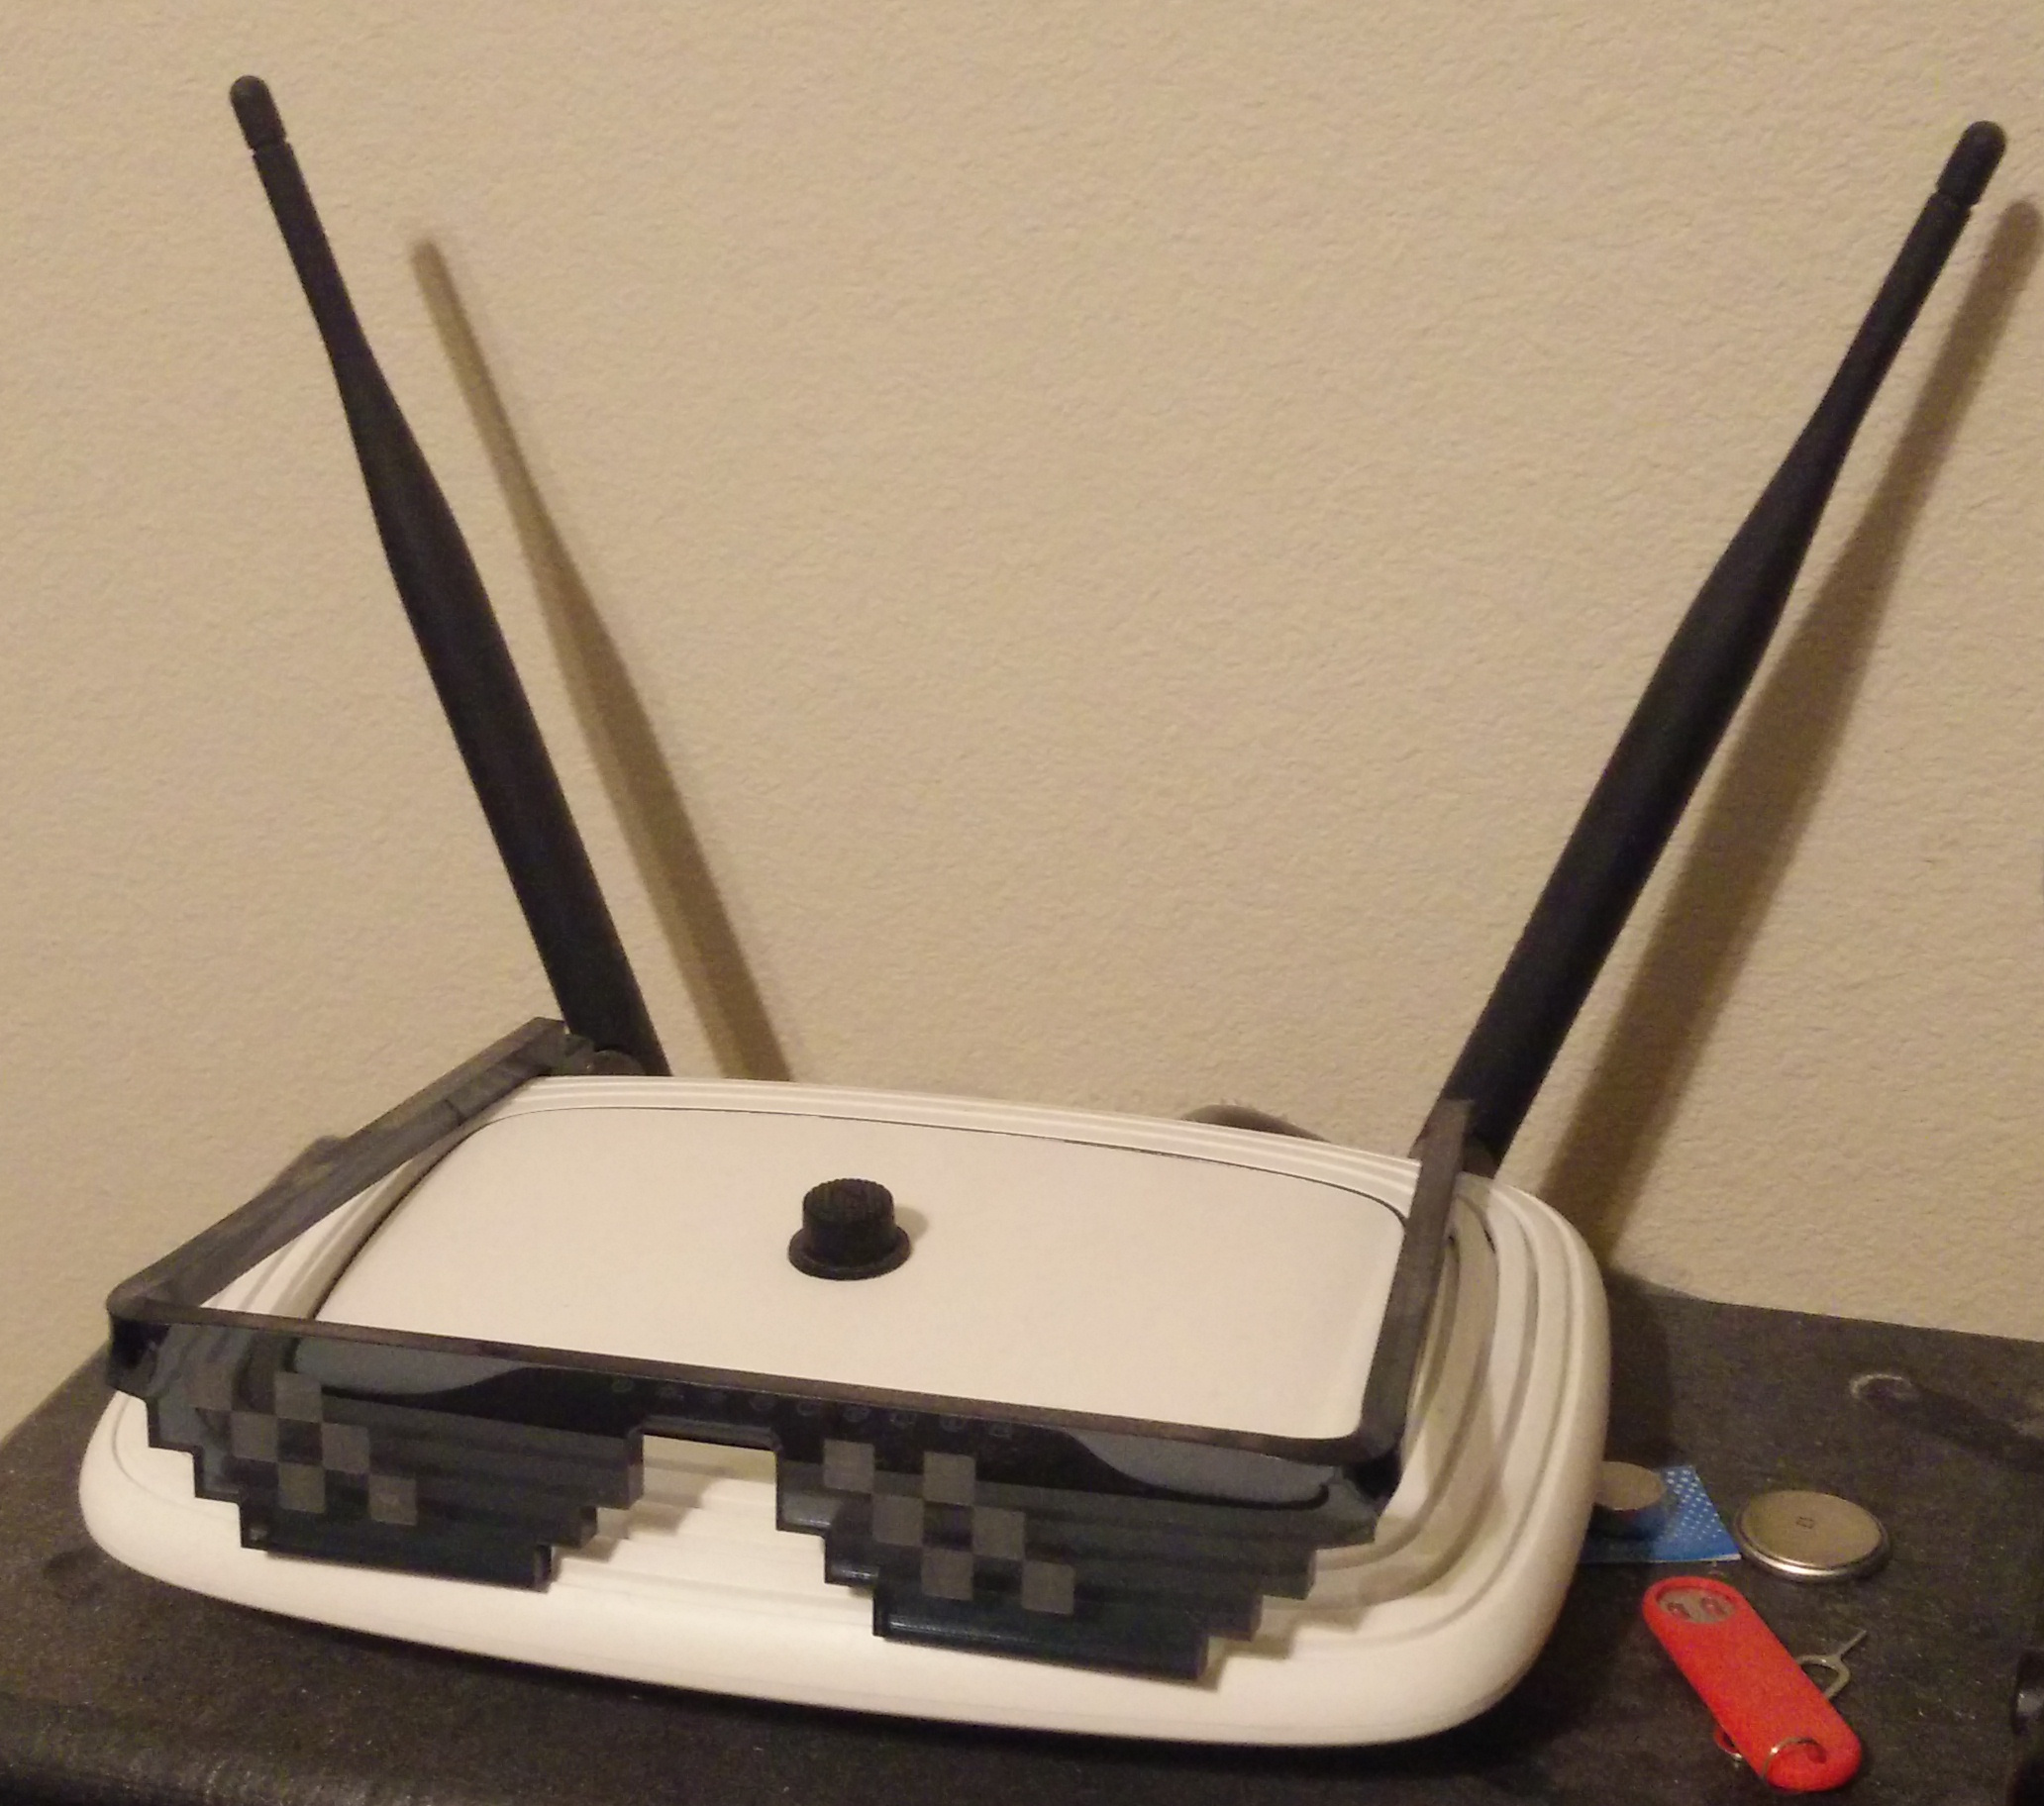 My home router